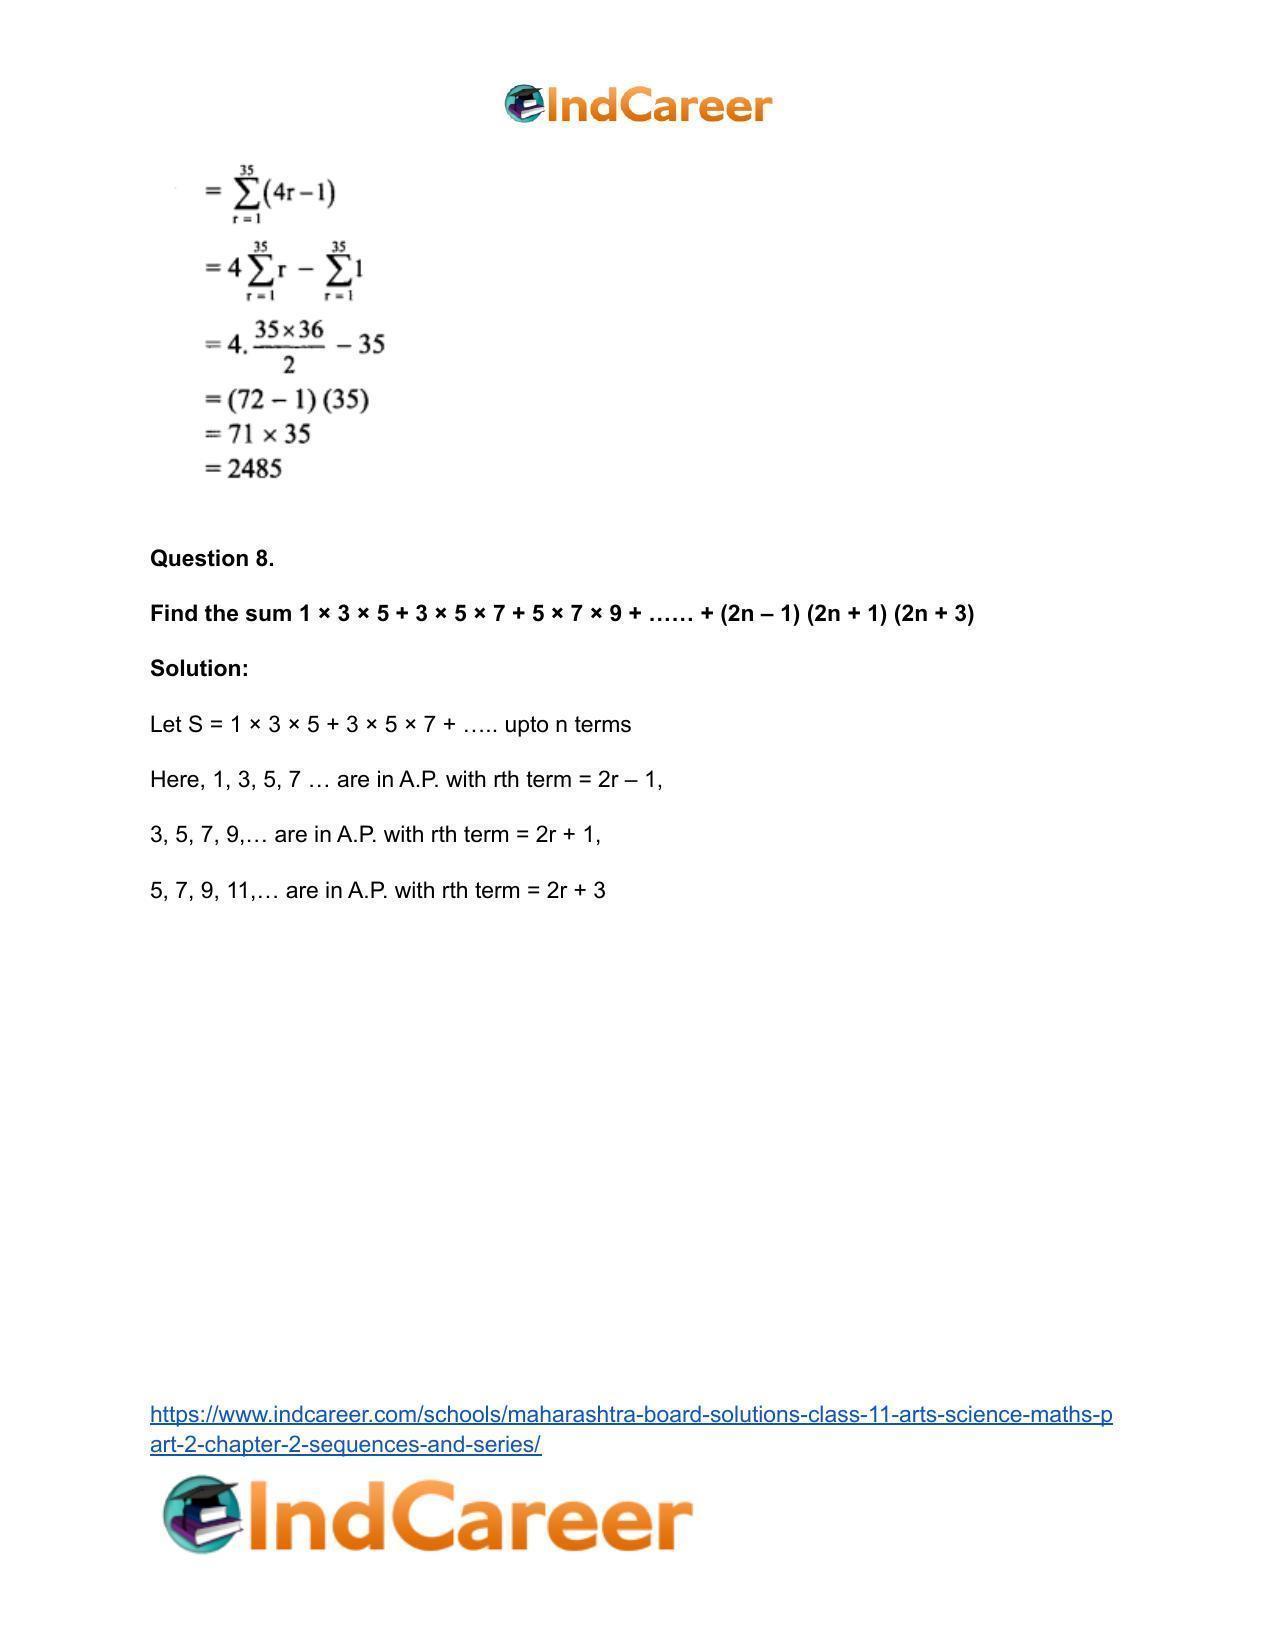 Maharashtra Board Solutions Class 11-Arts & Science Maths (Part 2): Chapter 2- Sequences and Series - Page 73